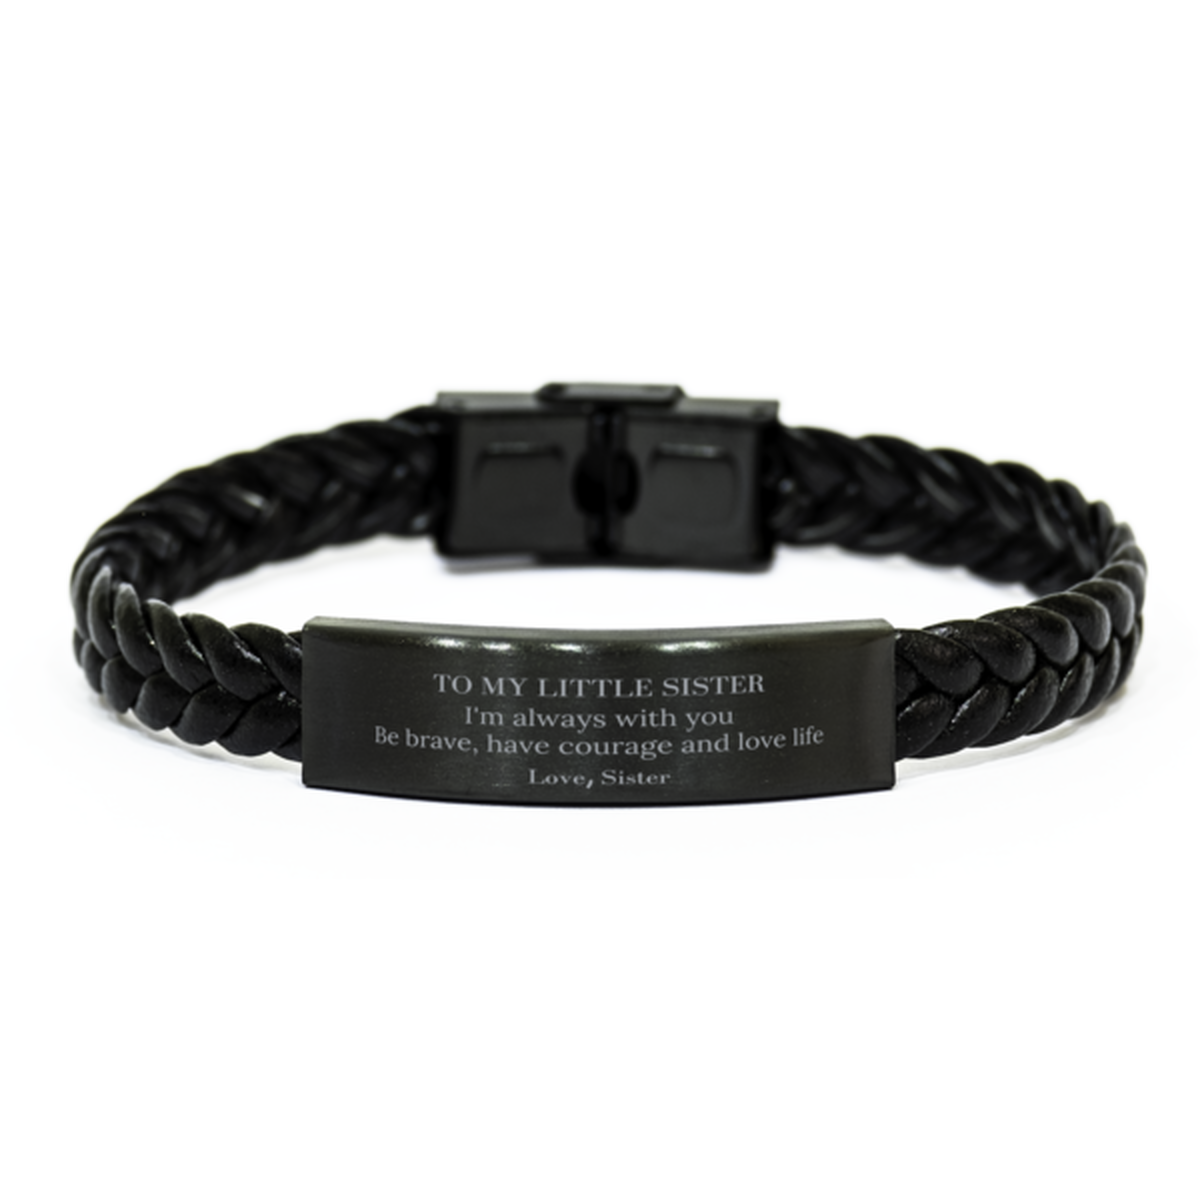 To My Little Sister Gifts from Sister, Unique Braided Leather Bracelet Inspirational Christmas Birthday Graduation Gifts for Little Sister I'm always with you. Be brave, have courage and love life. Love, Sister